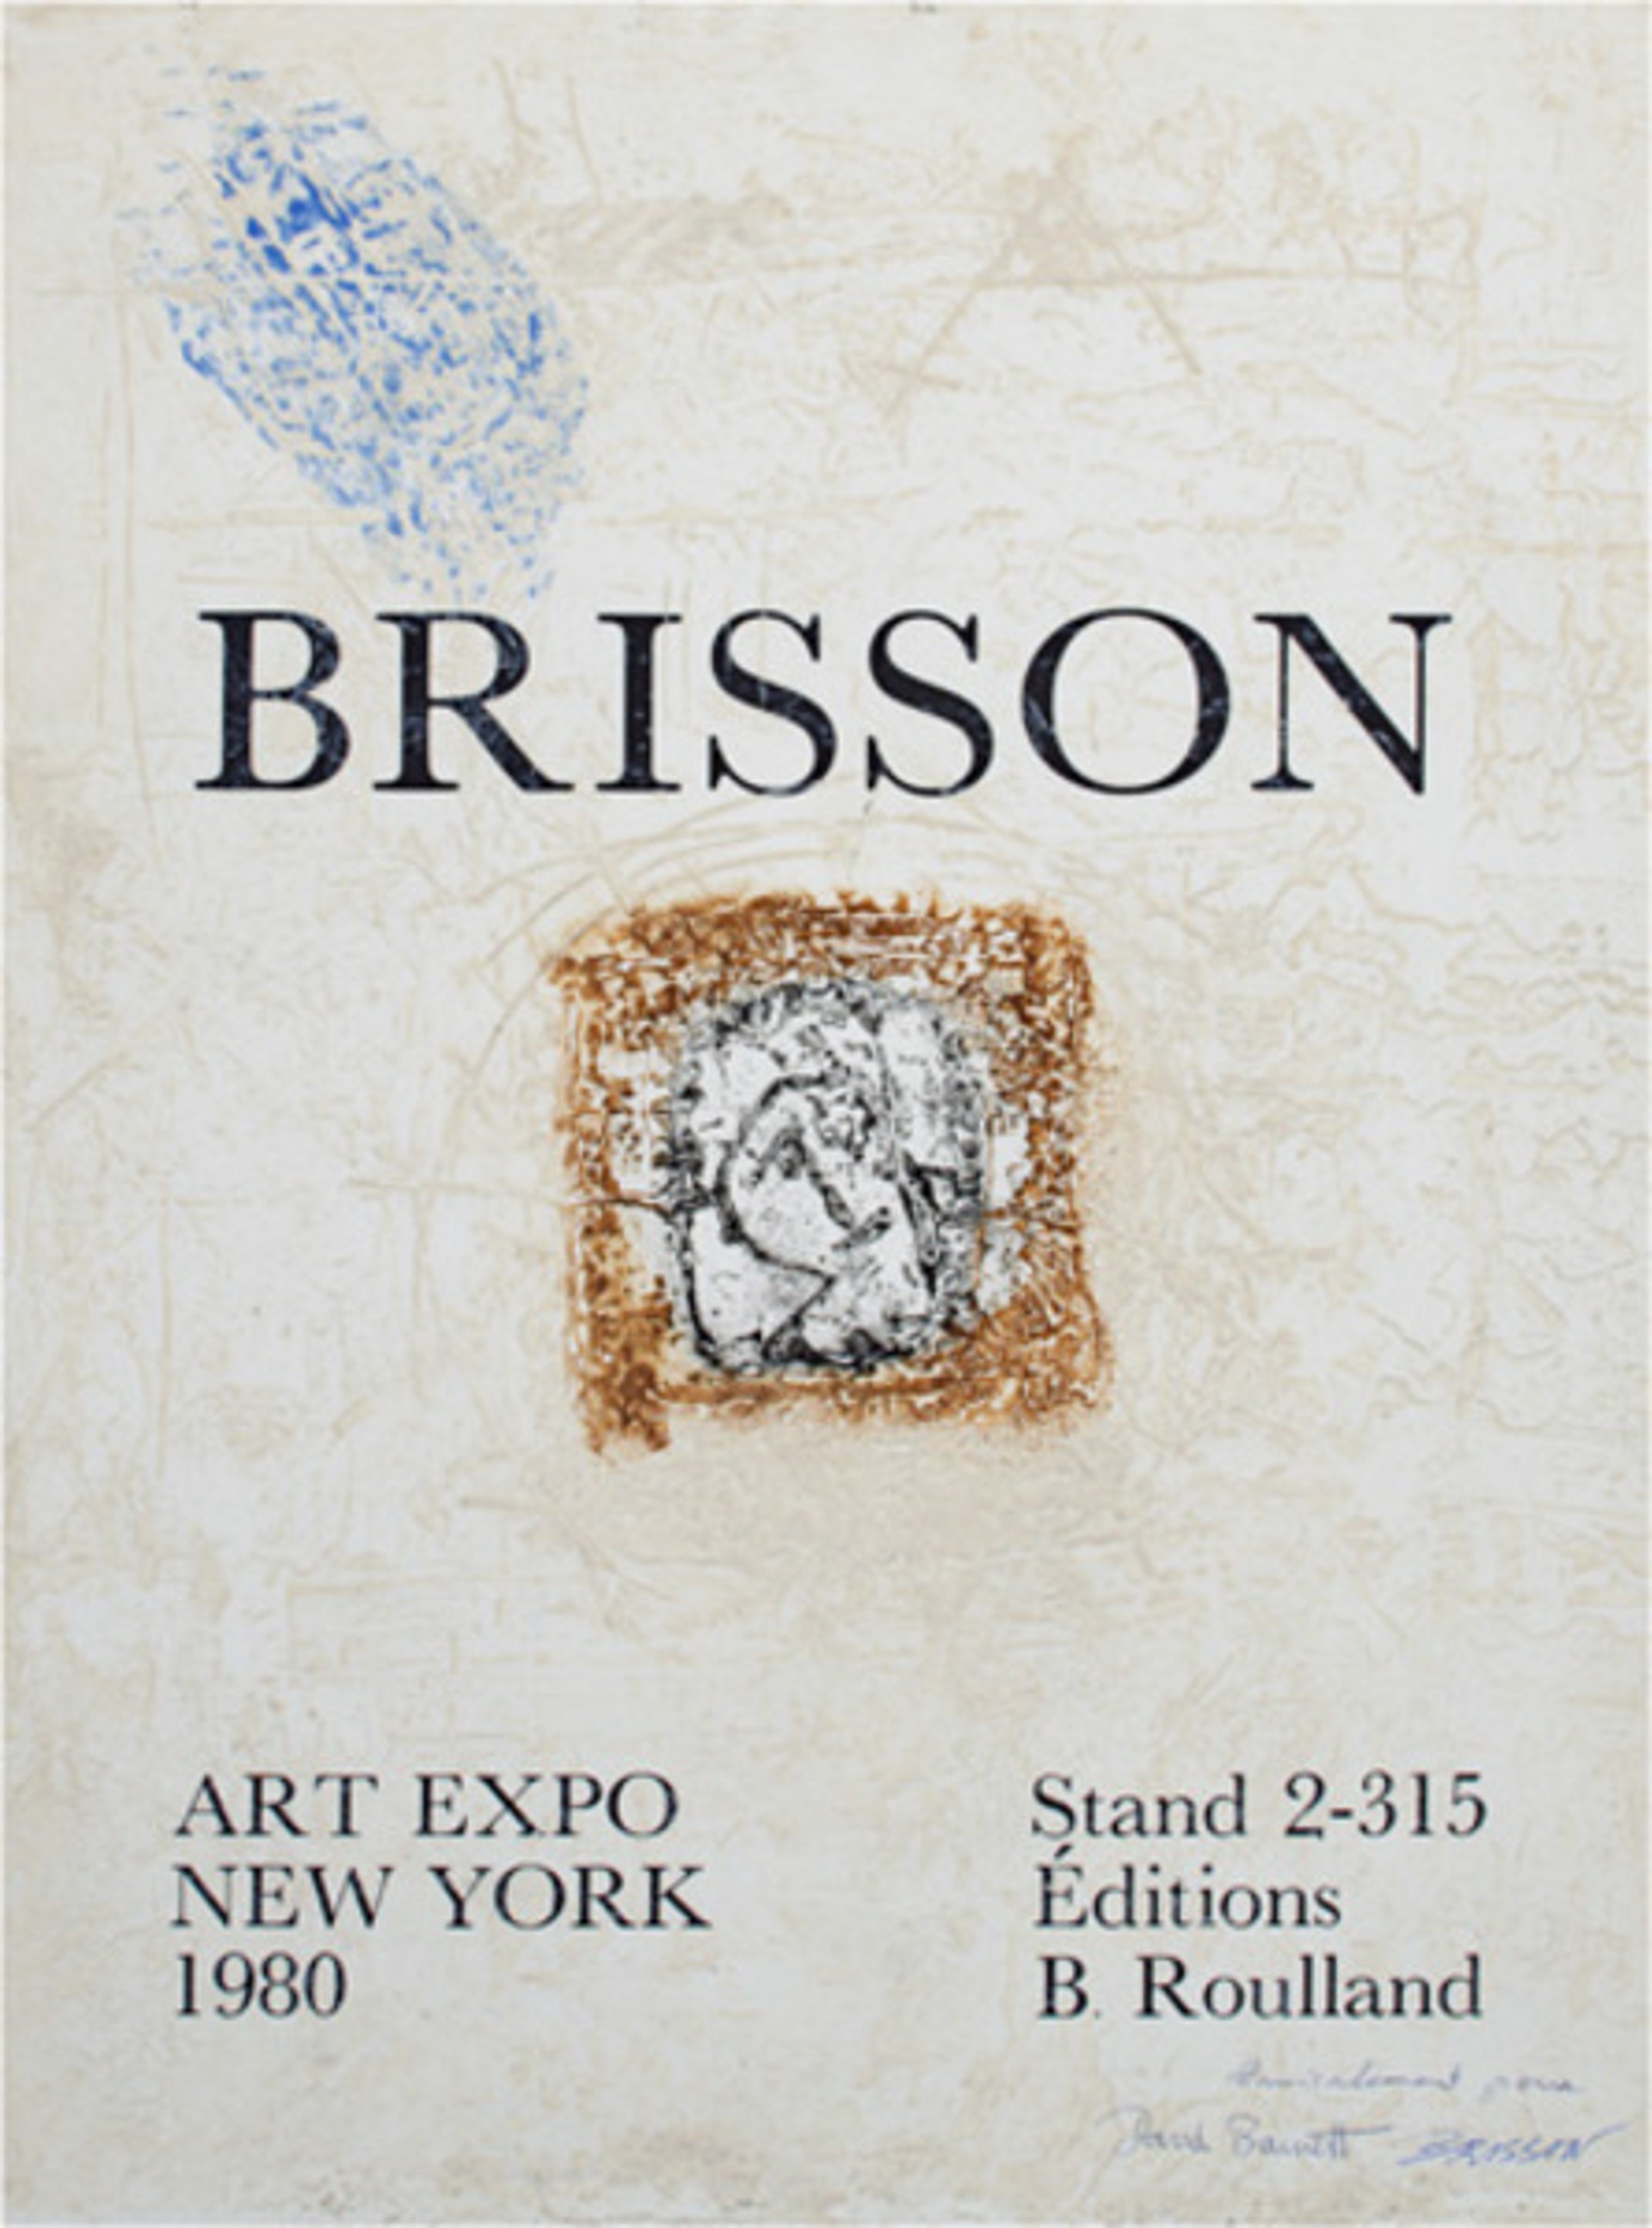 Art Expo, New York, signed and inscribed to D.B. by Pierre Marie Brisson